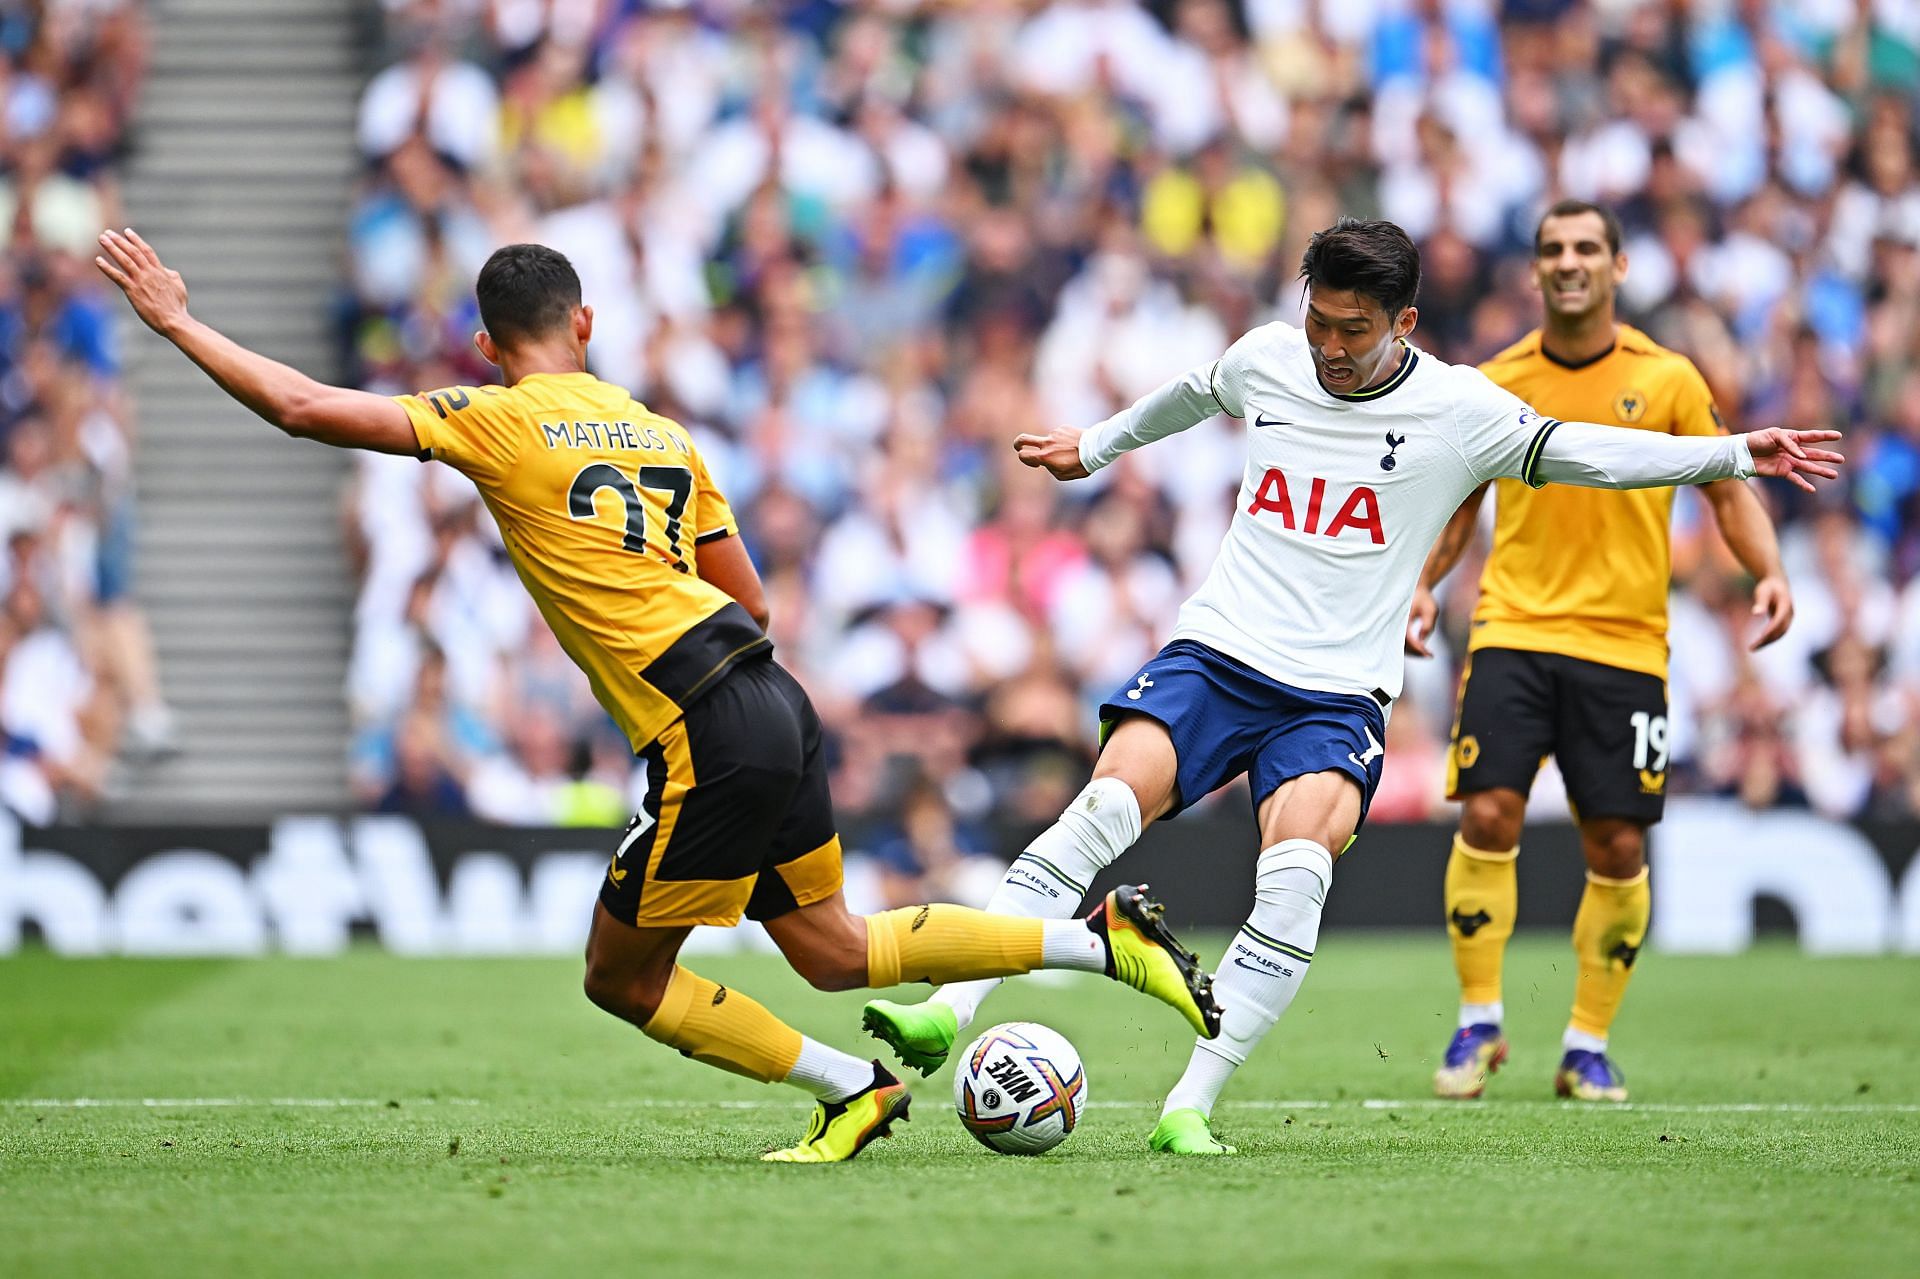 Tottenham have taken time to get going in all three of their Premier League matches thus far